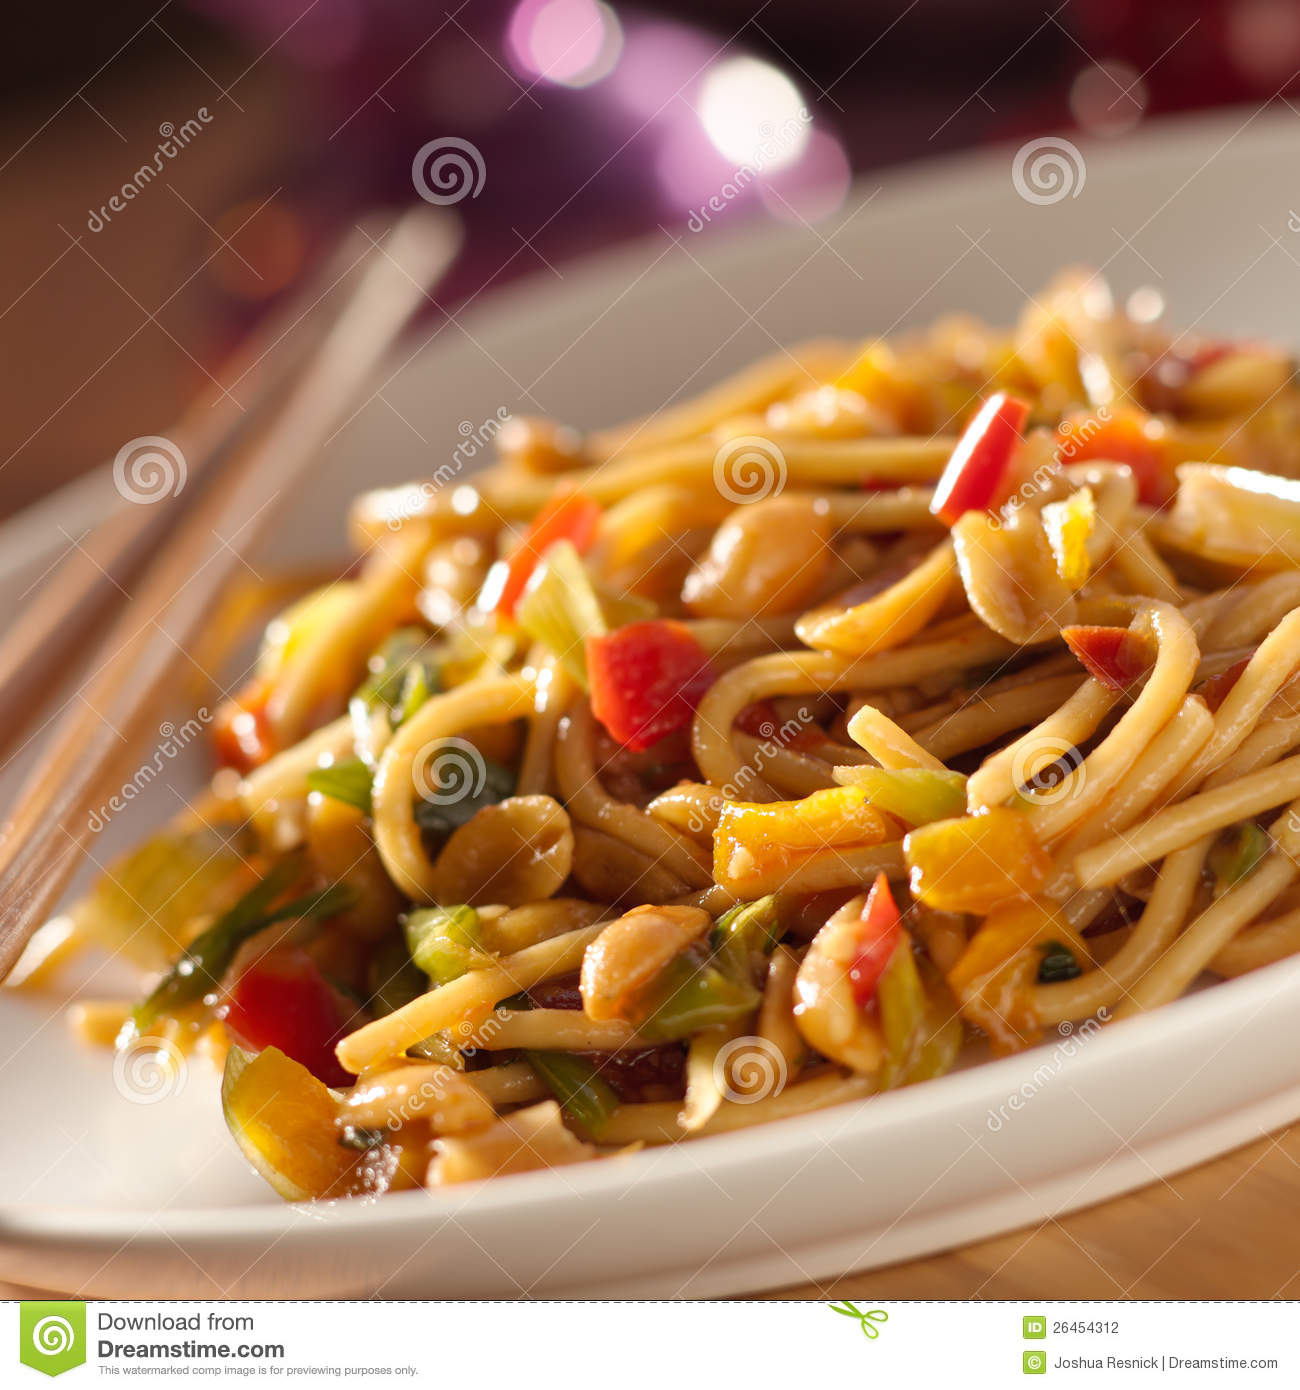 Spicy Thai Noodles With Chopsticks  Stock Photography   Image